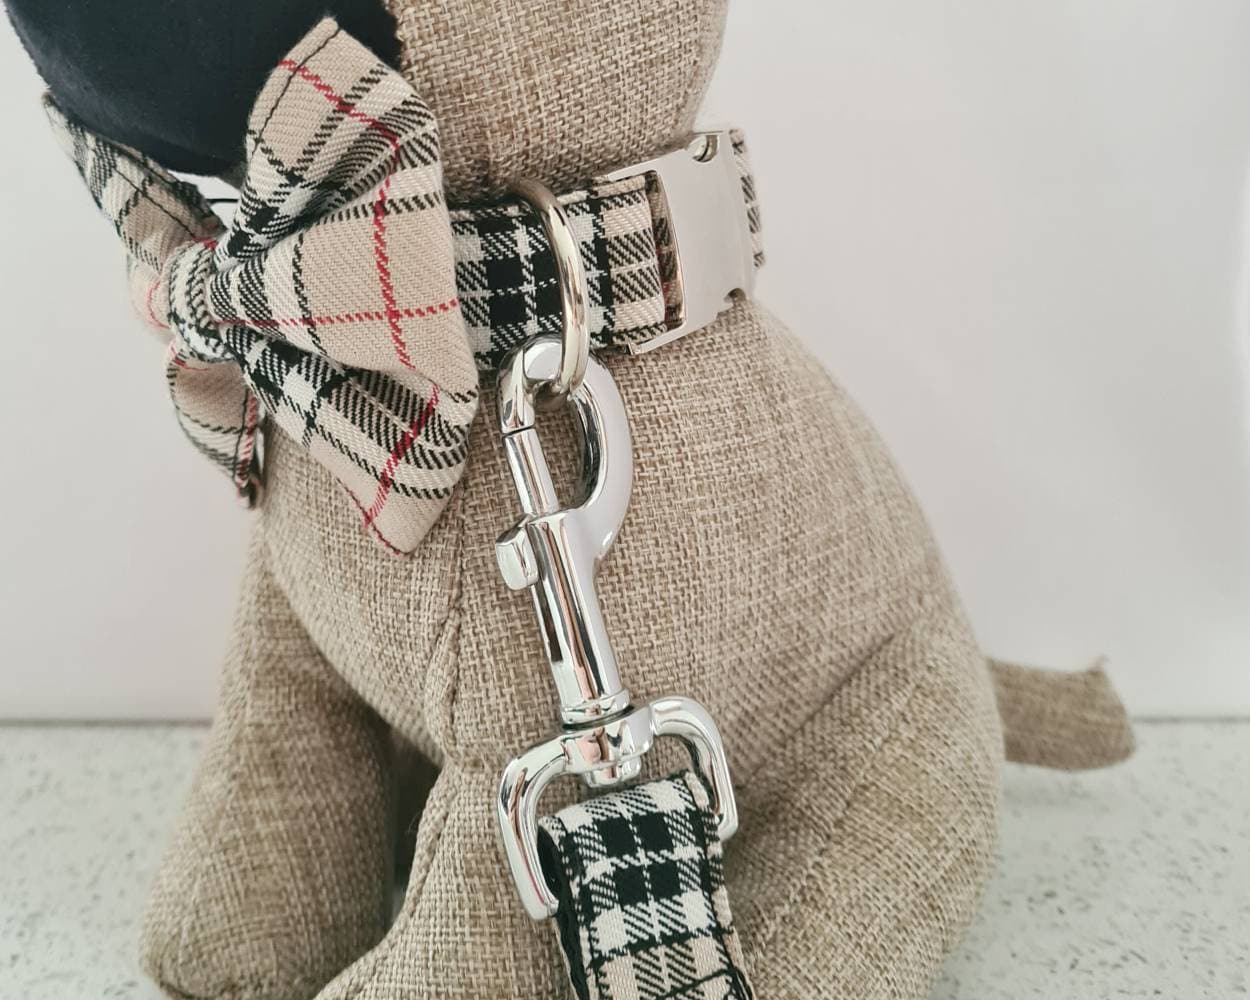 Burberry with Metal Horse Accessory Dog Collar and Leash - Royal